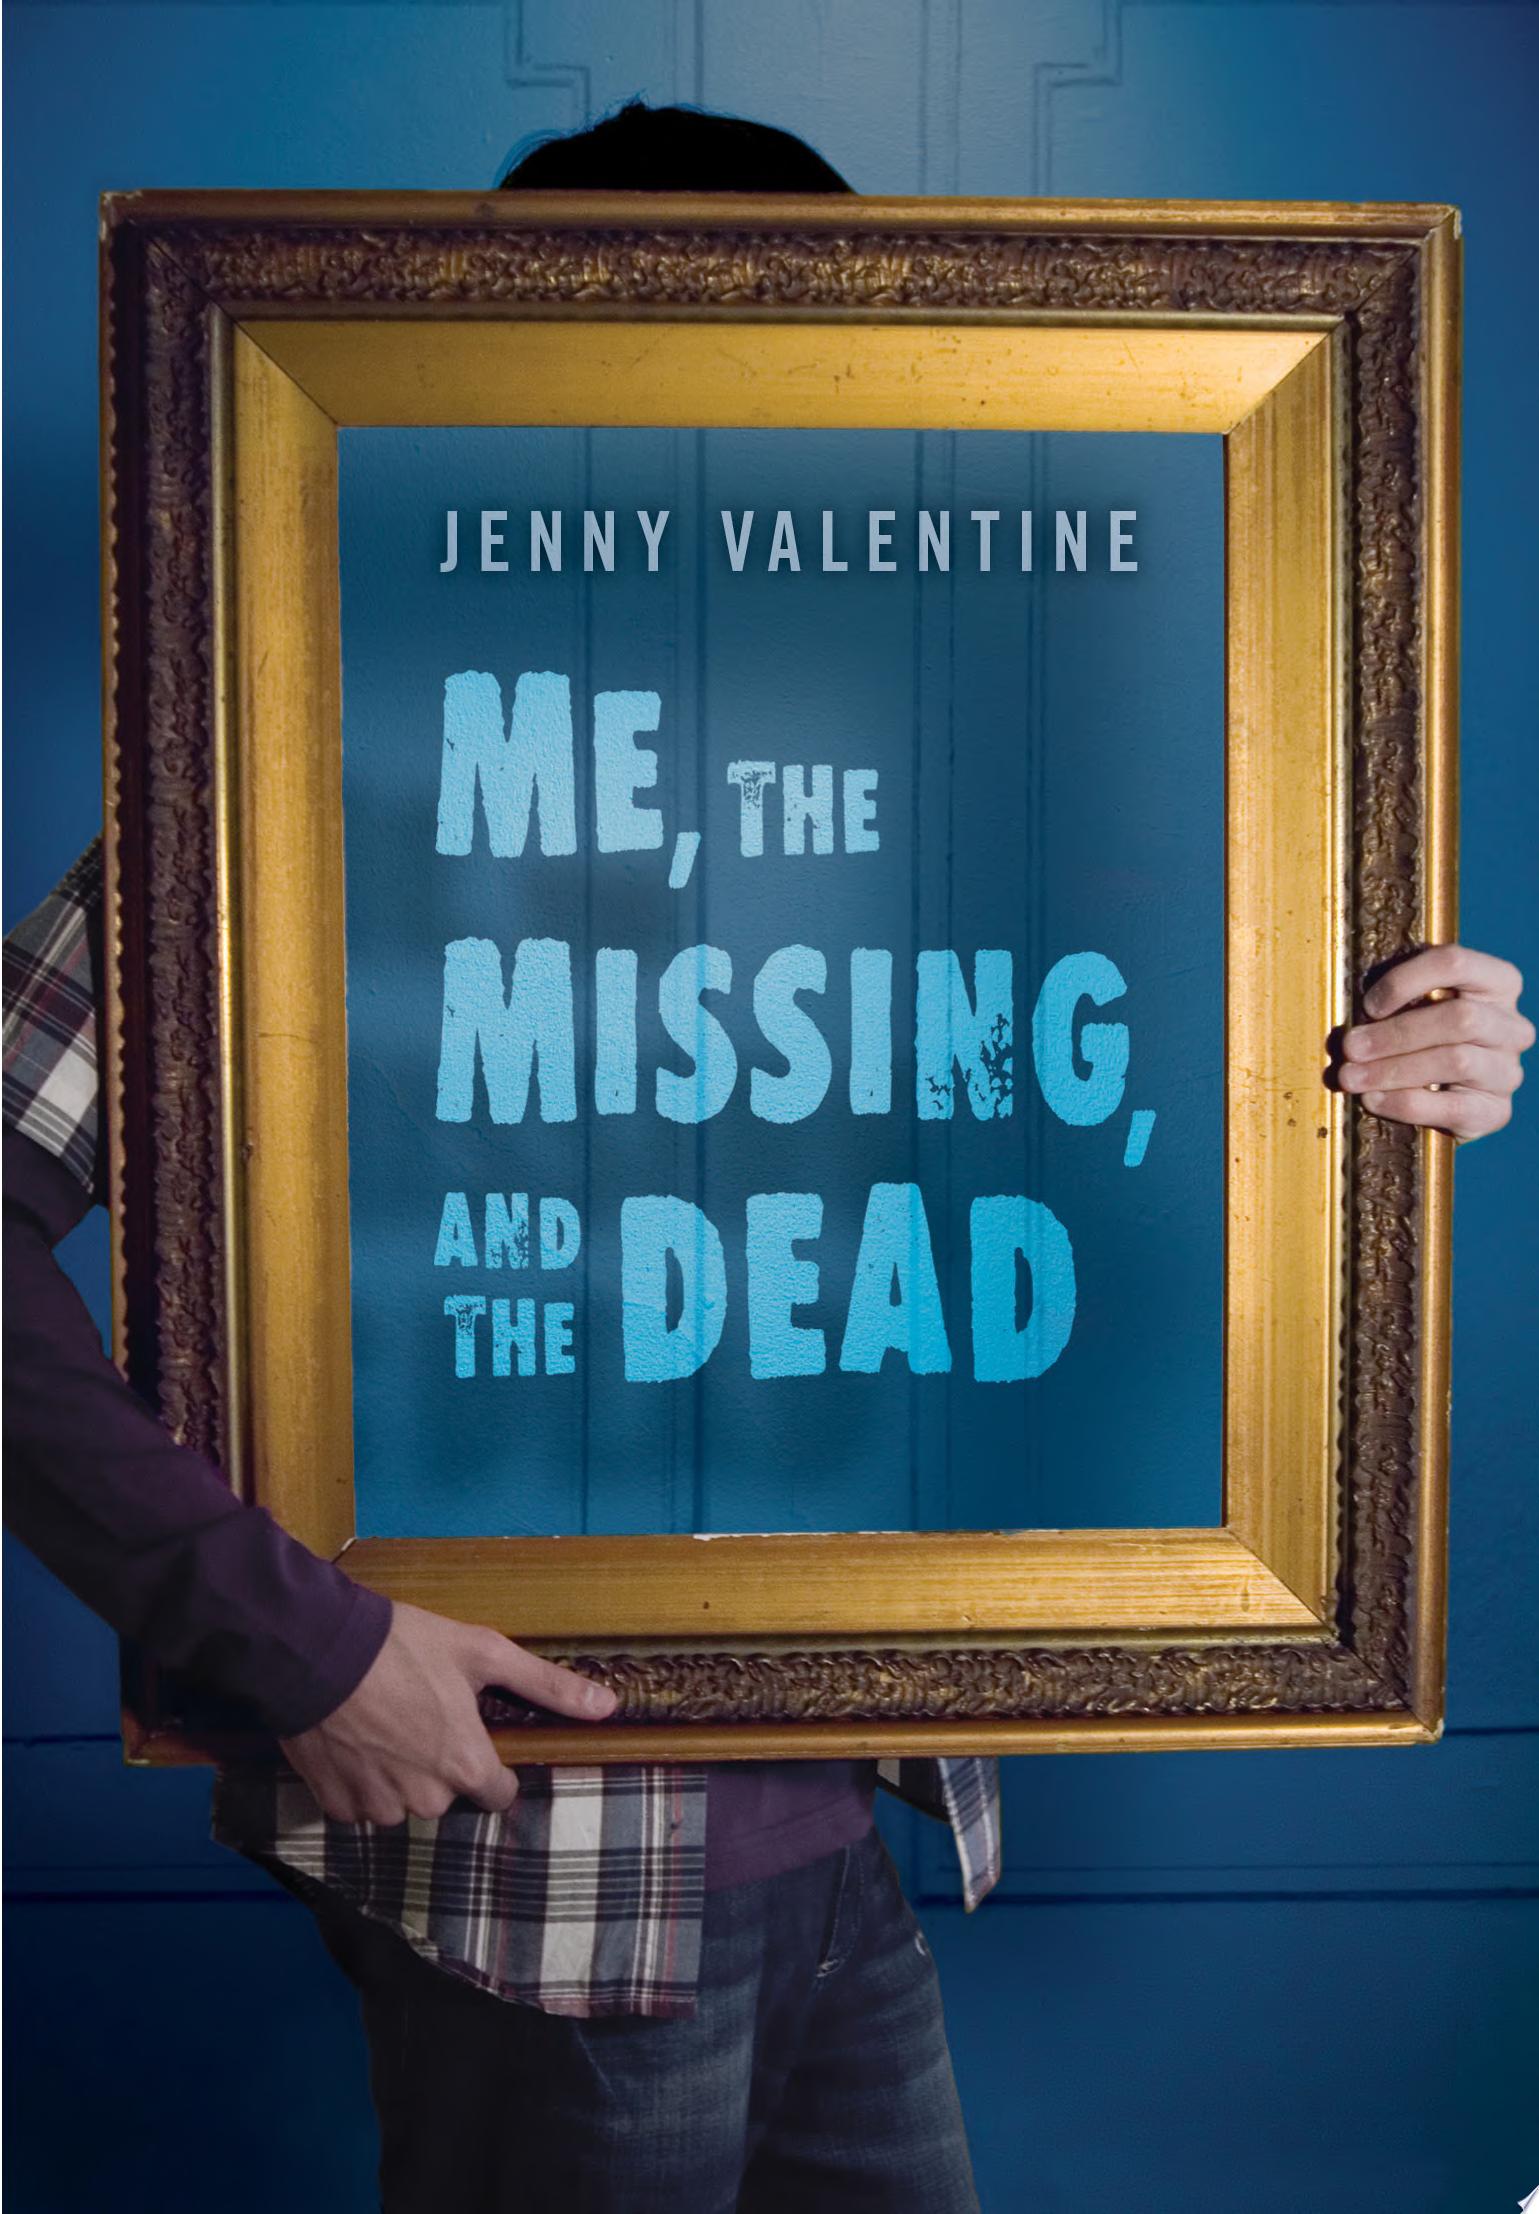 Image for "Me, the Missing, and the Dead"